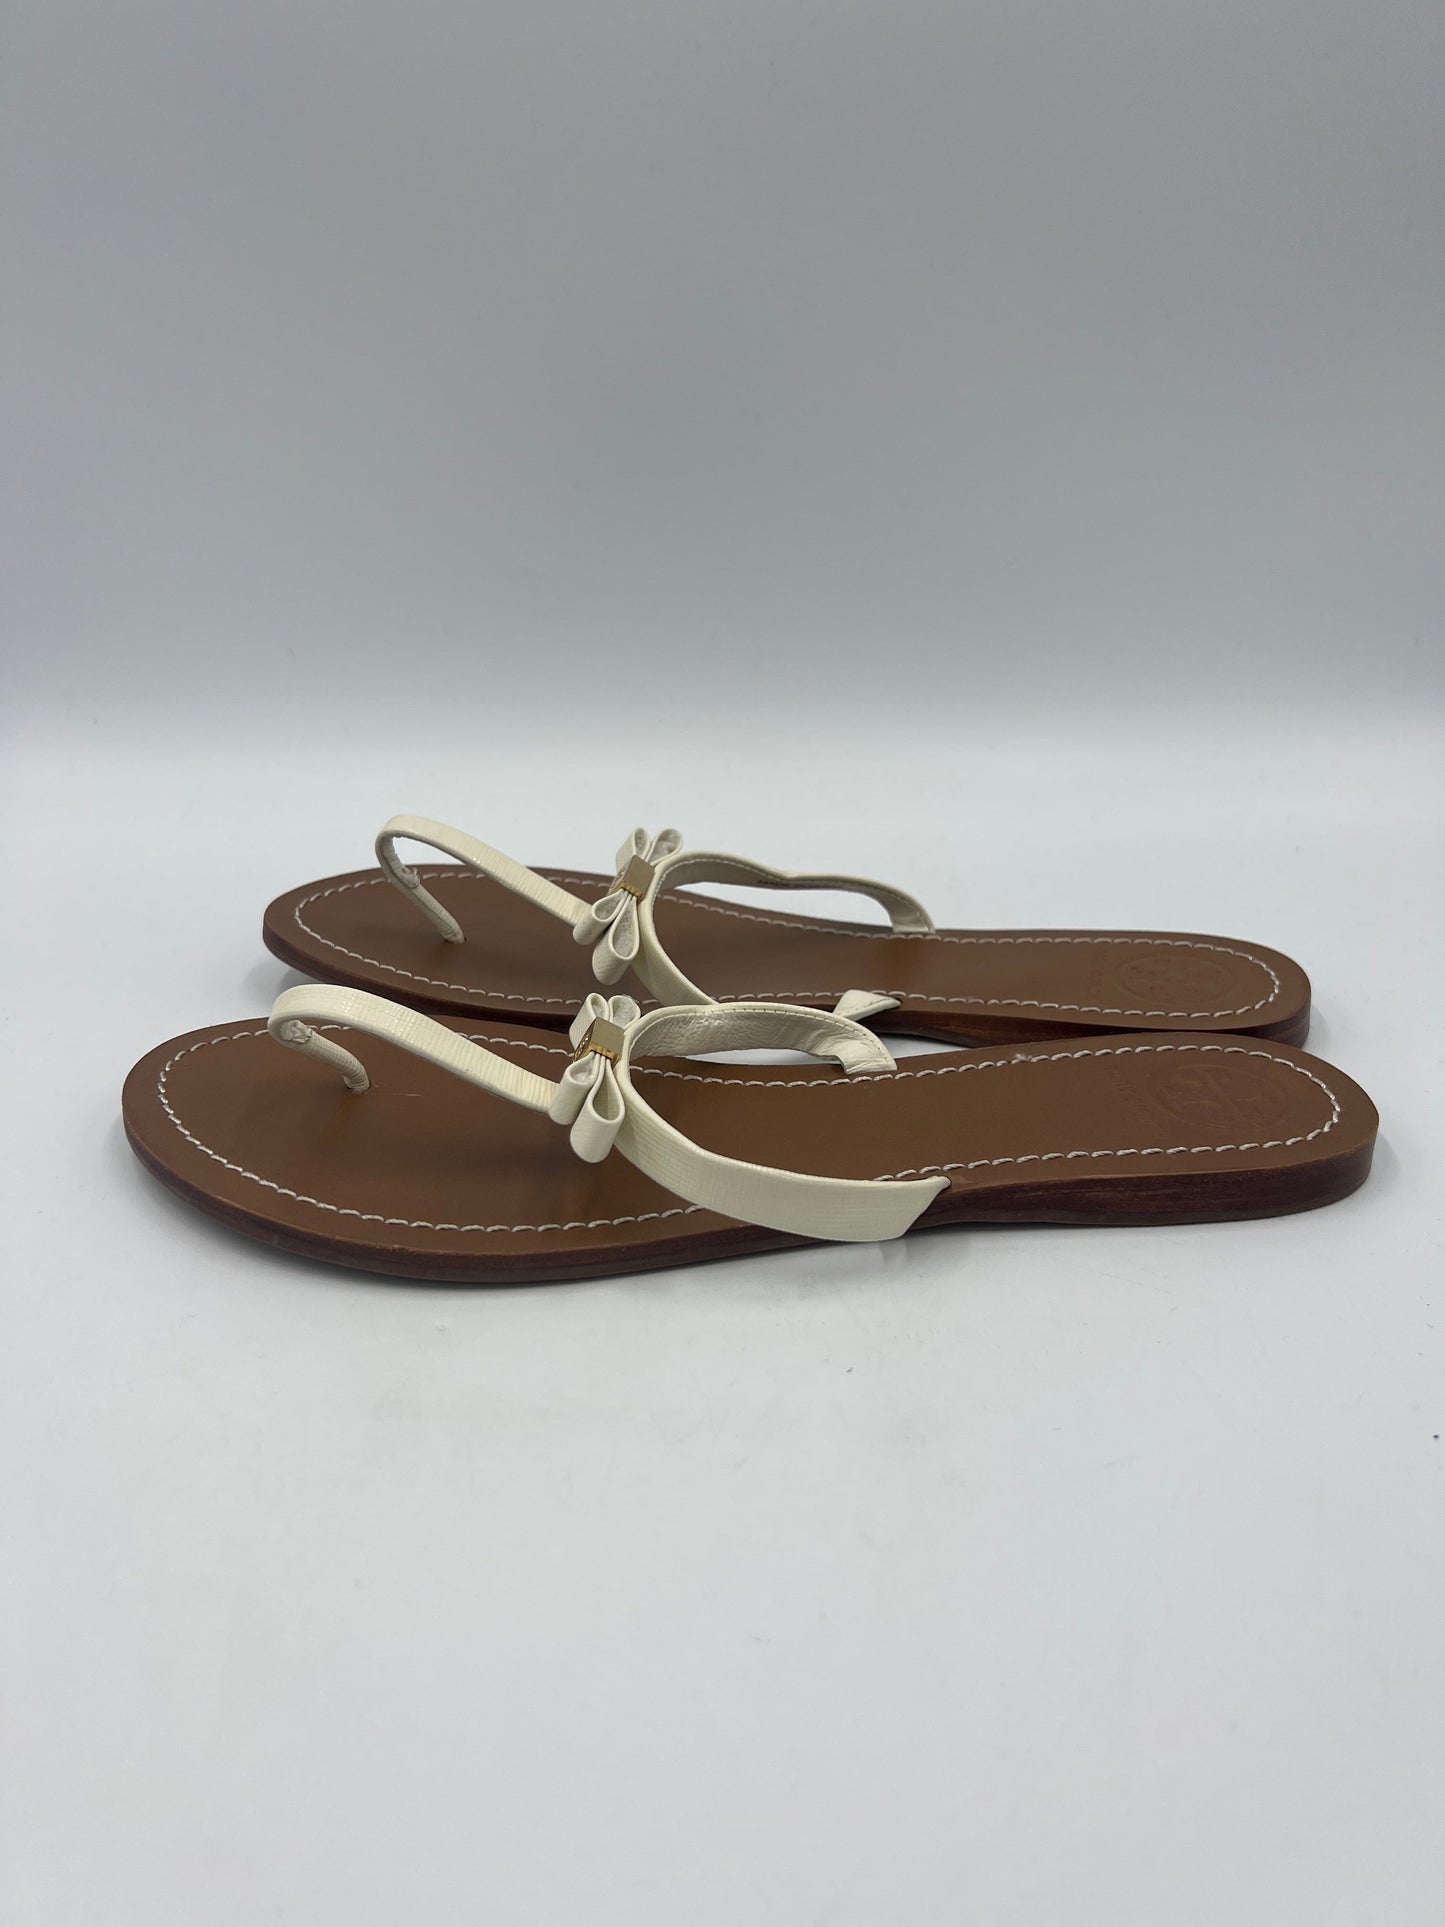 New! Sandals Designer By Tory Burch  Size: 12